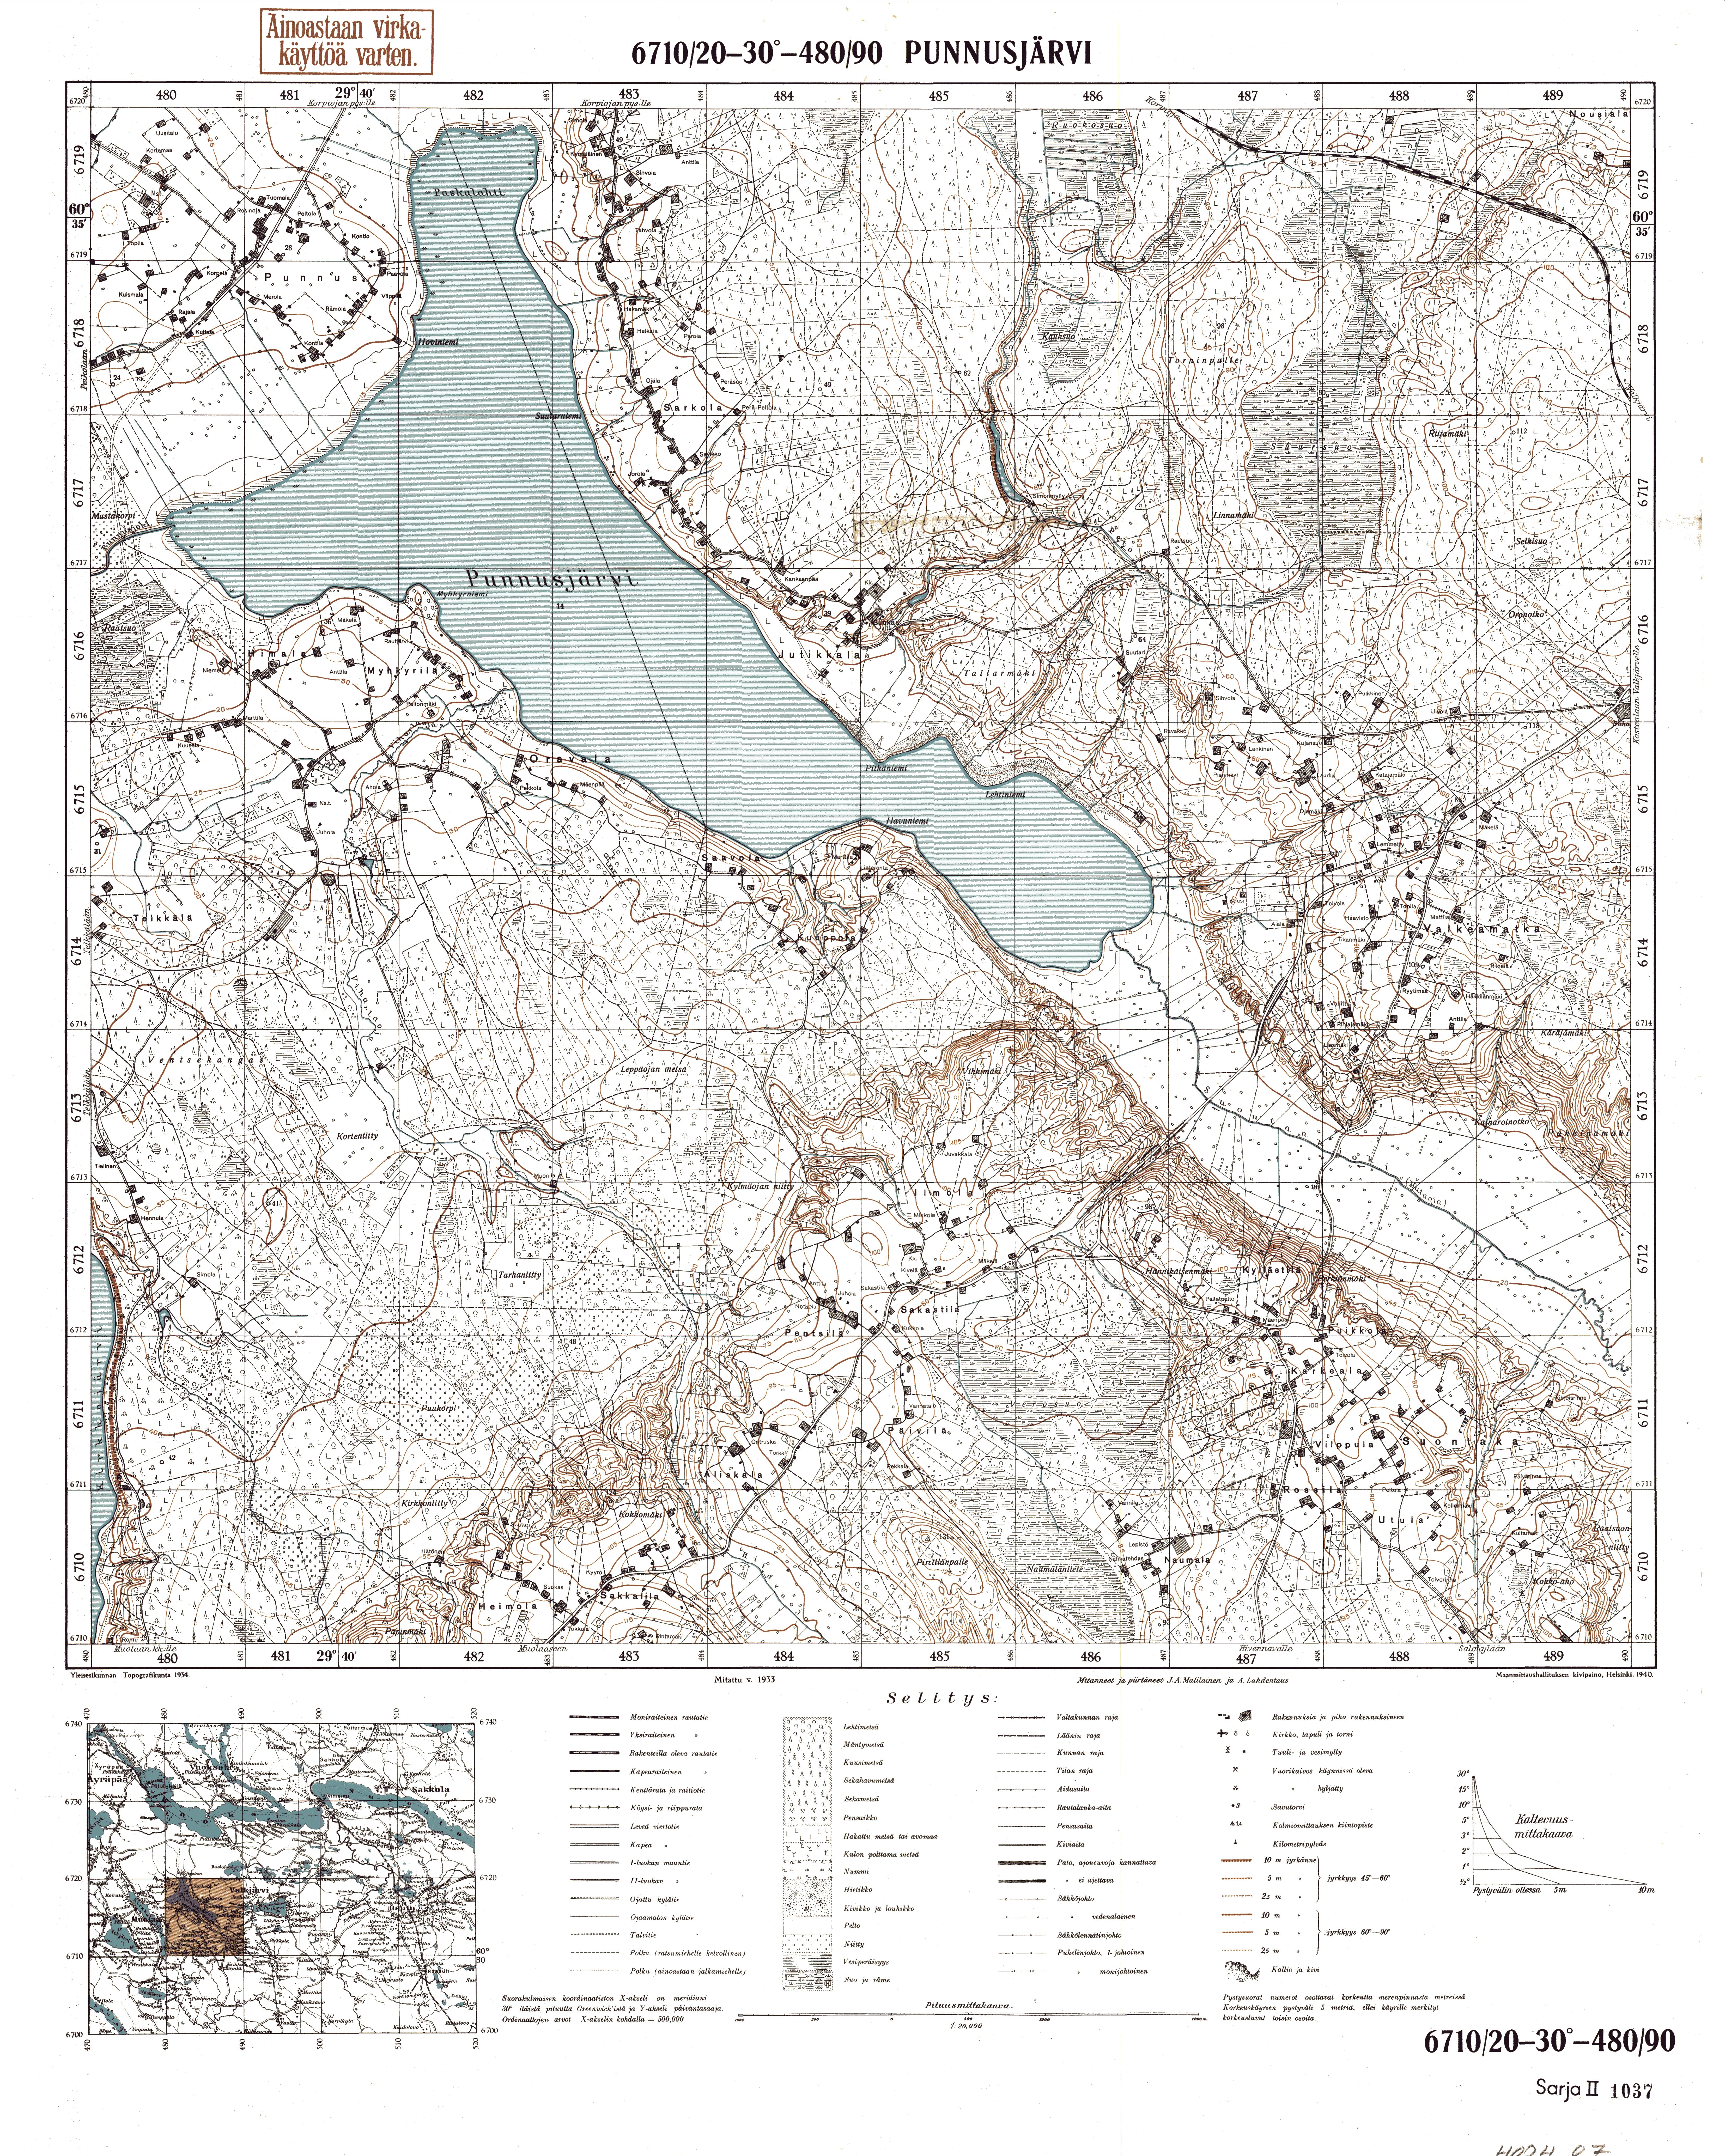 Krasnoje Lake. Punnusjärvi. Topografikartta 402407. Topographic map from 1938. Use the zooming tool to explore in higher level of detail. Obtain as a quality print or high resolution image